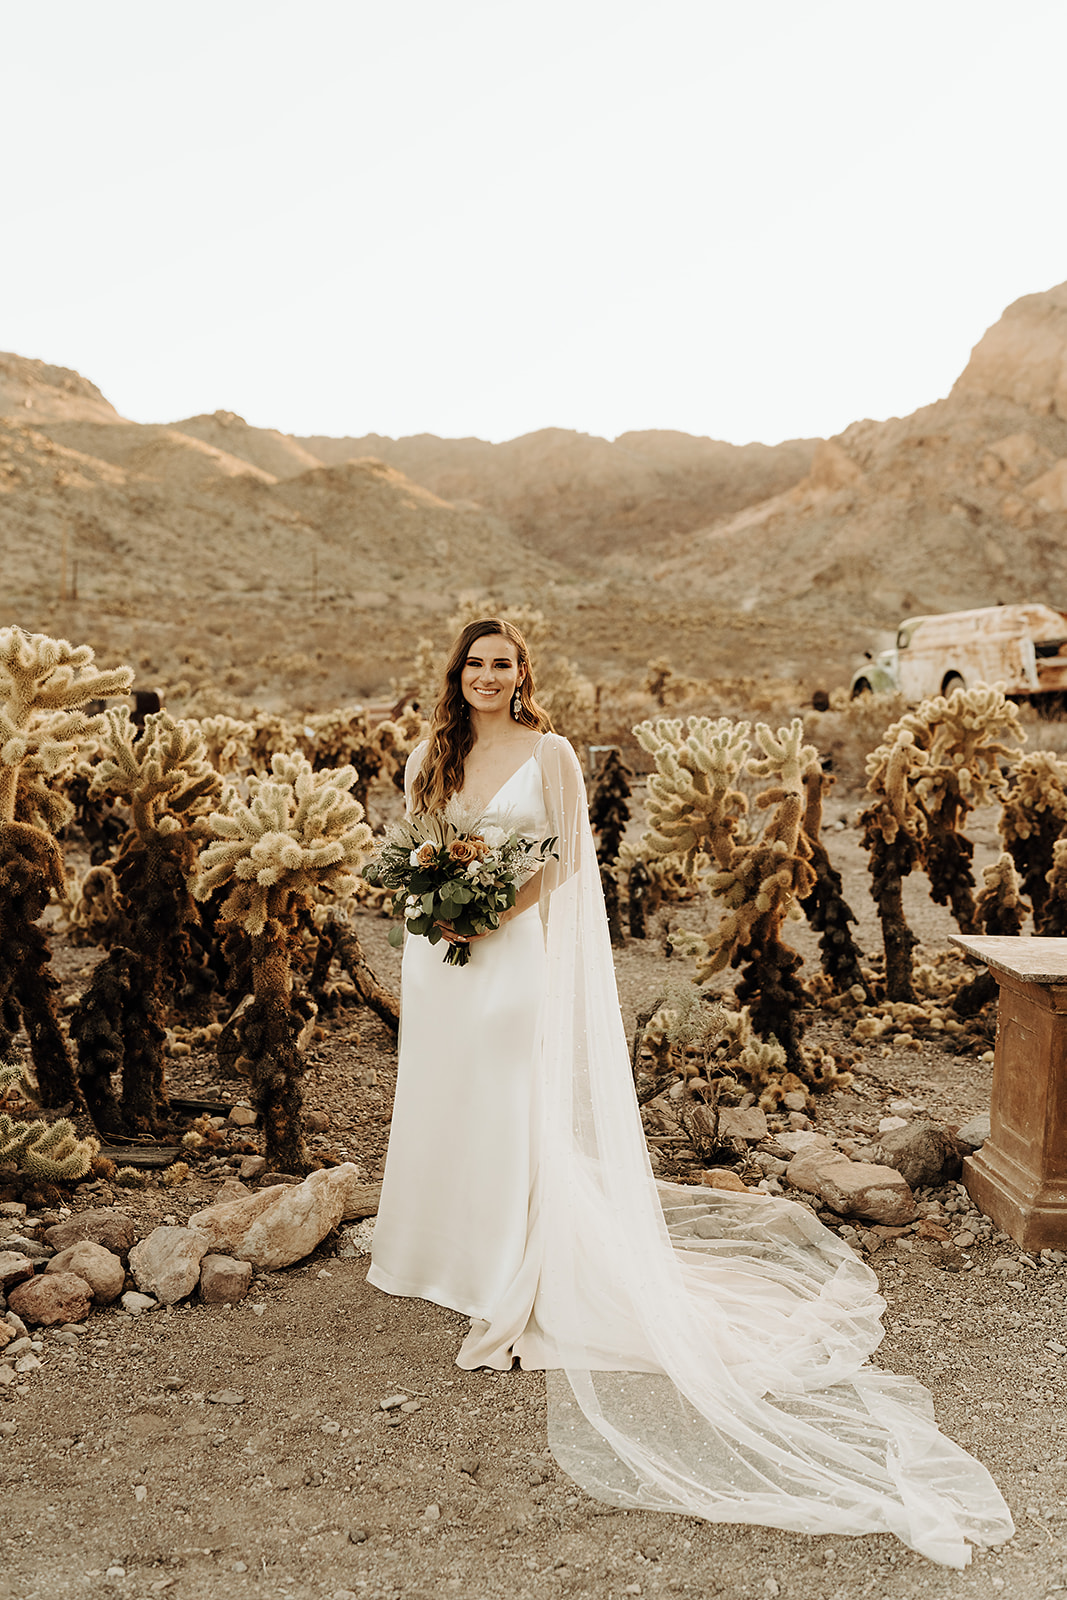 Stunning bride smiles while holding her bouquet at the Cholla Cactus Fields